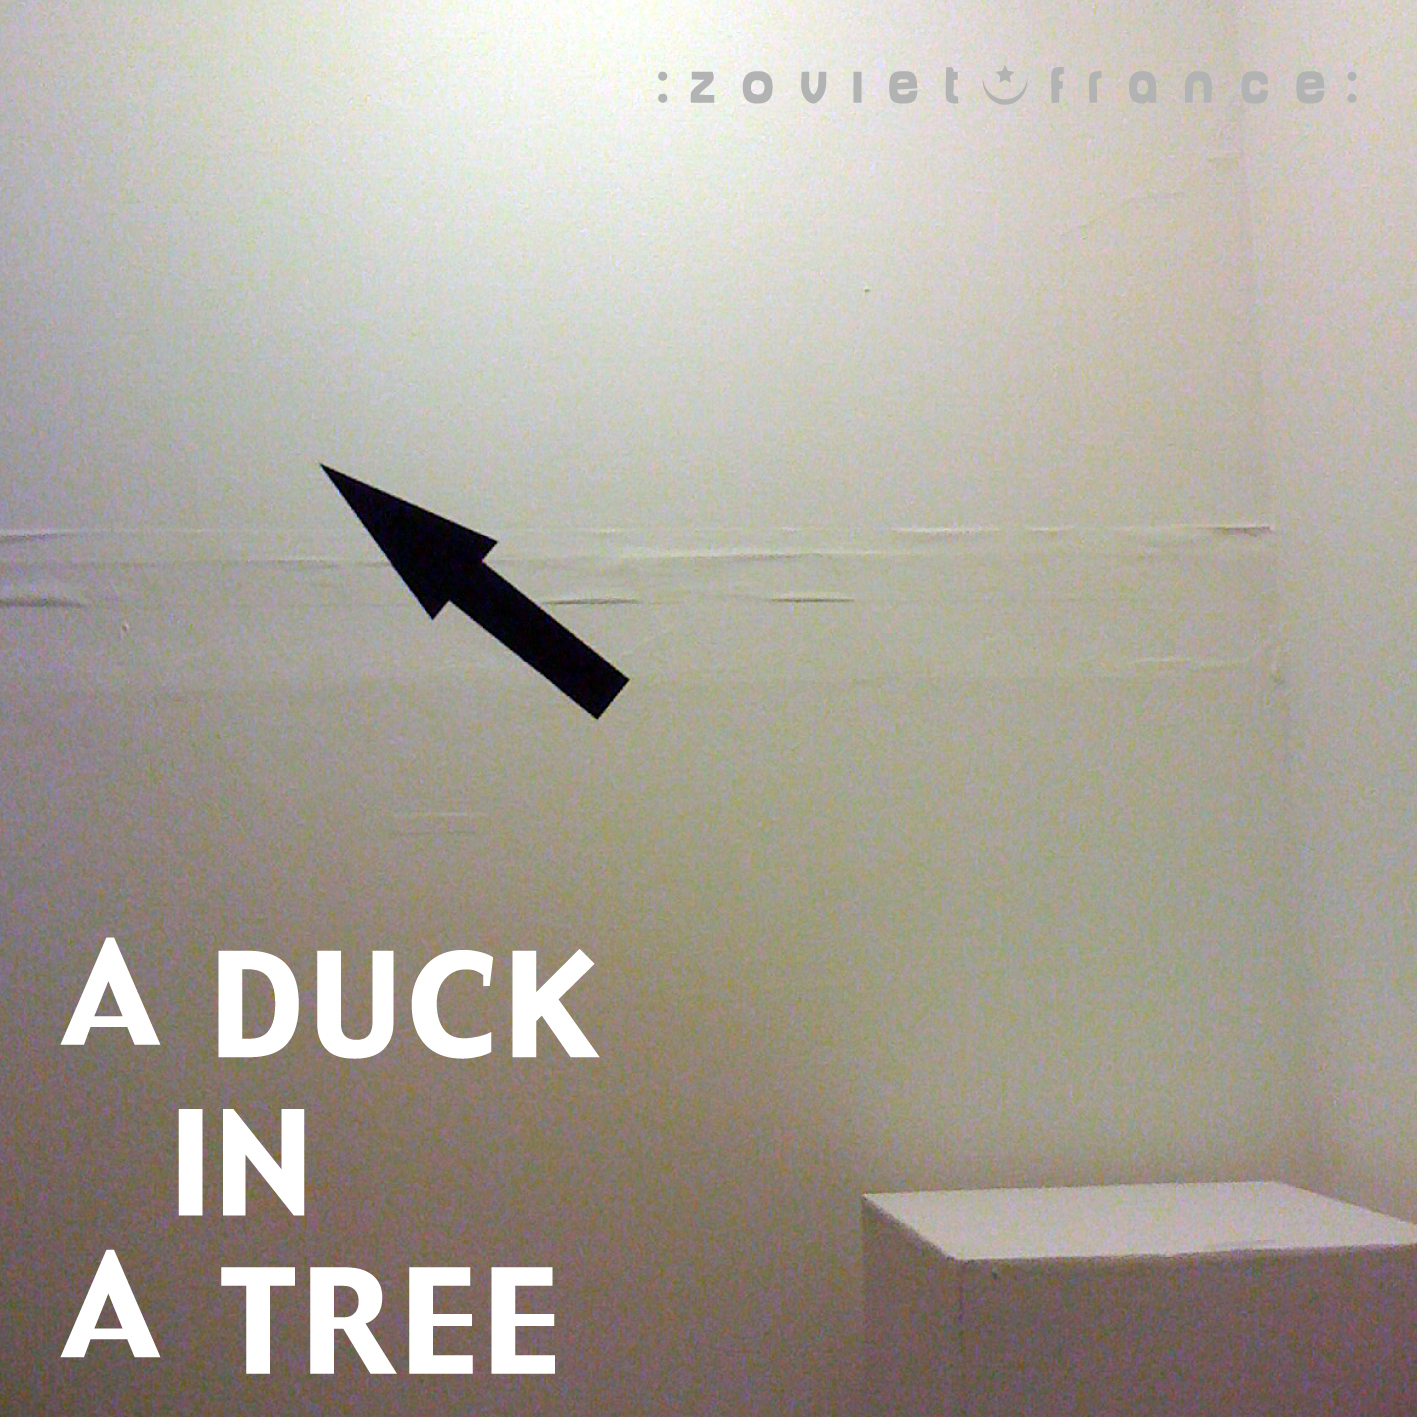 A-Duck-in-a-Tree-2012-11-17-_-Sightings-from-a-Blind-Summit-layout.jpg